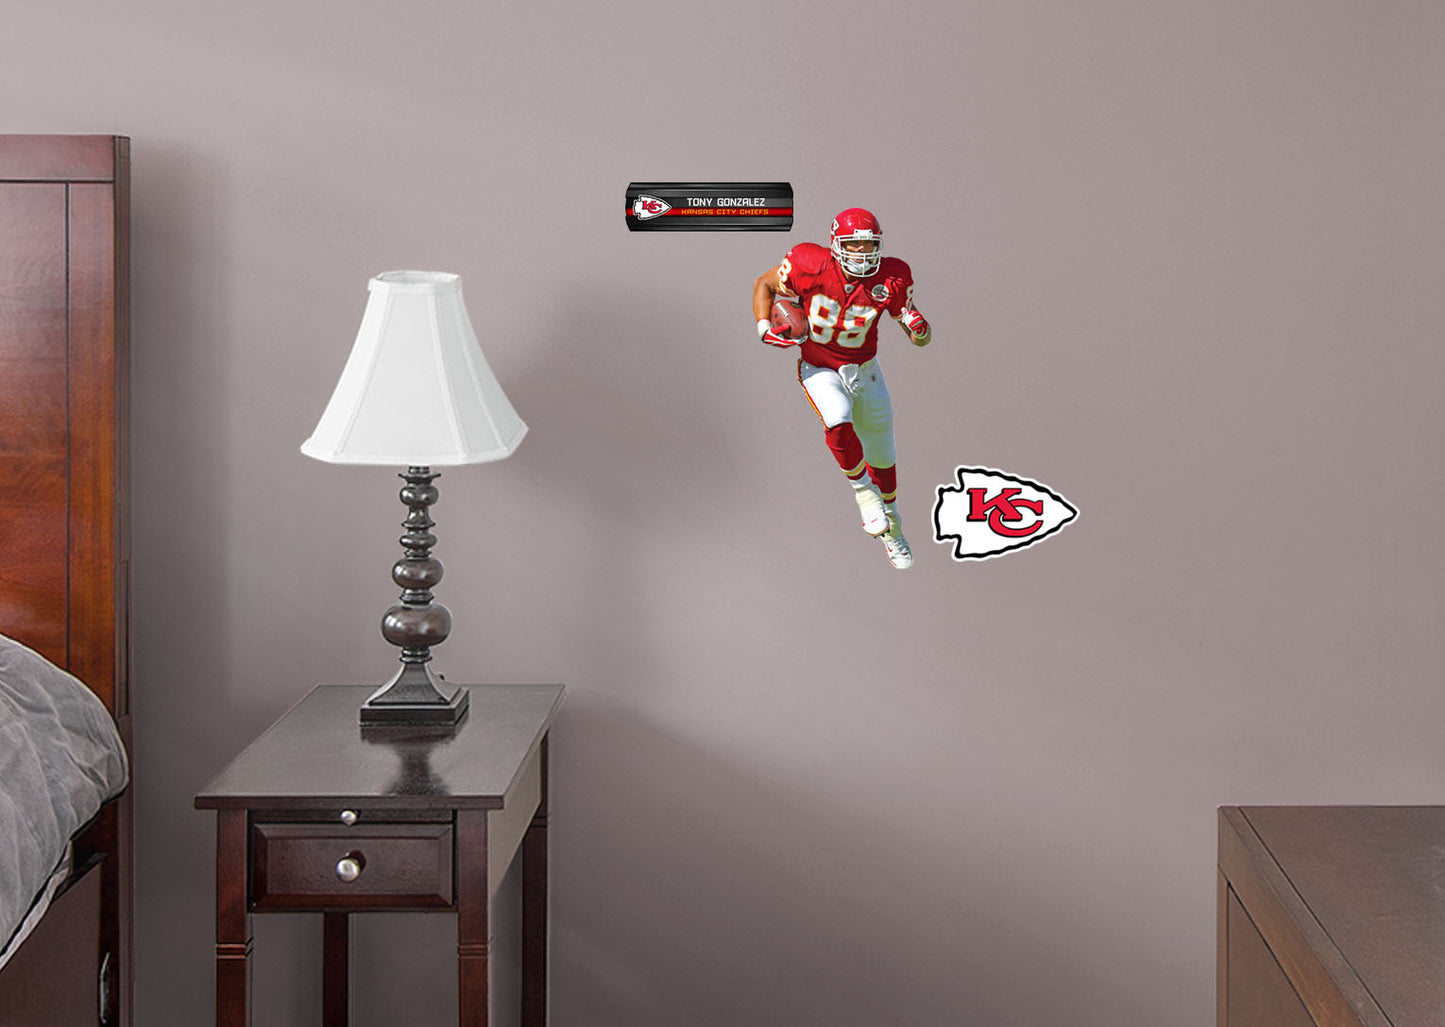 Kansas City Chiefs: Tony Gonzalez  Legend        - Officially Licensed NFL Removable Wall   Adhesive Decal